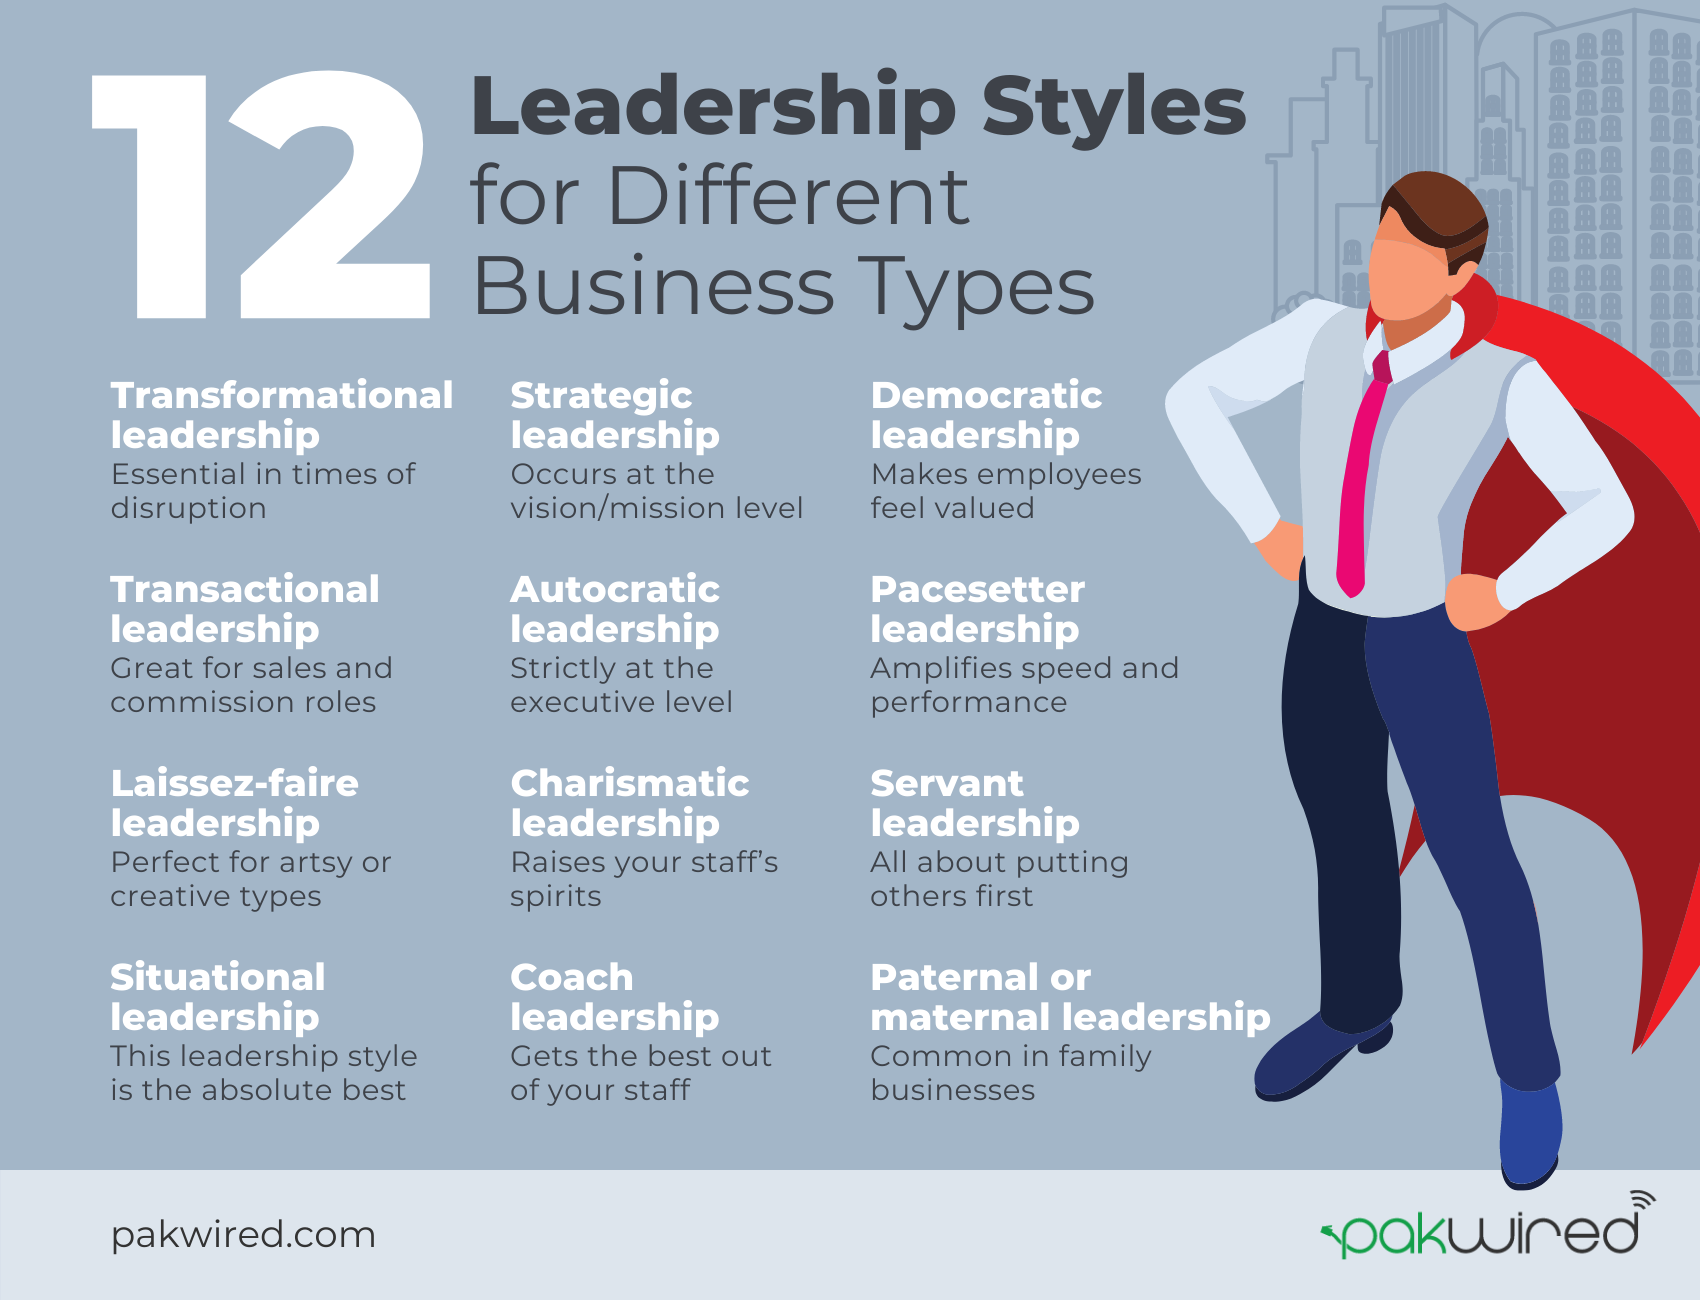 12 Leadership Styles for Different Business Types and Work Environments